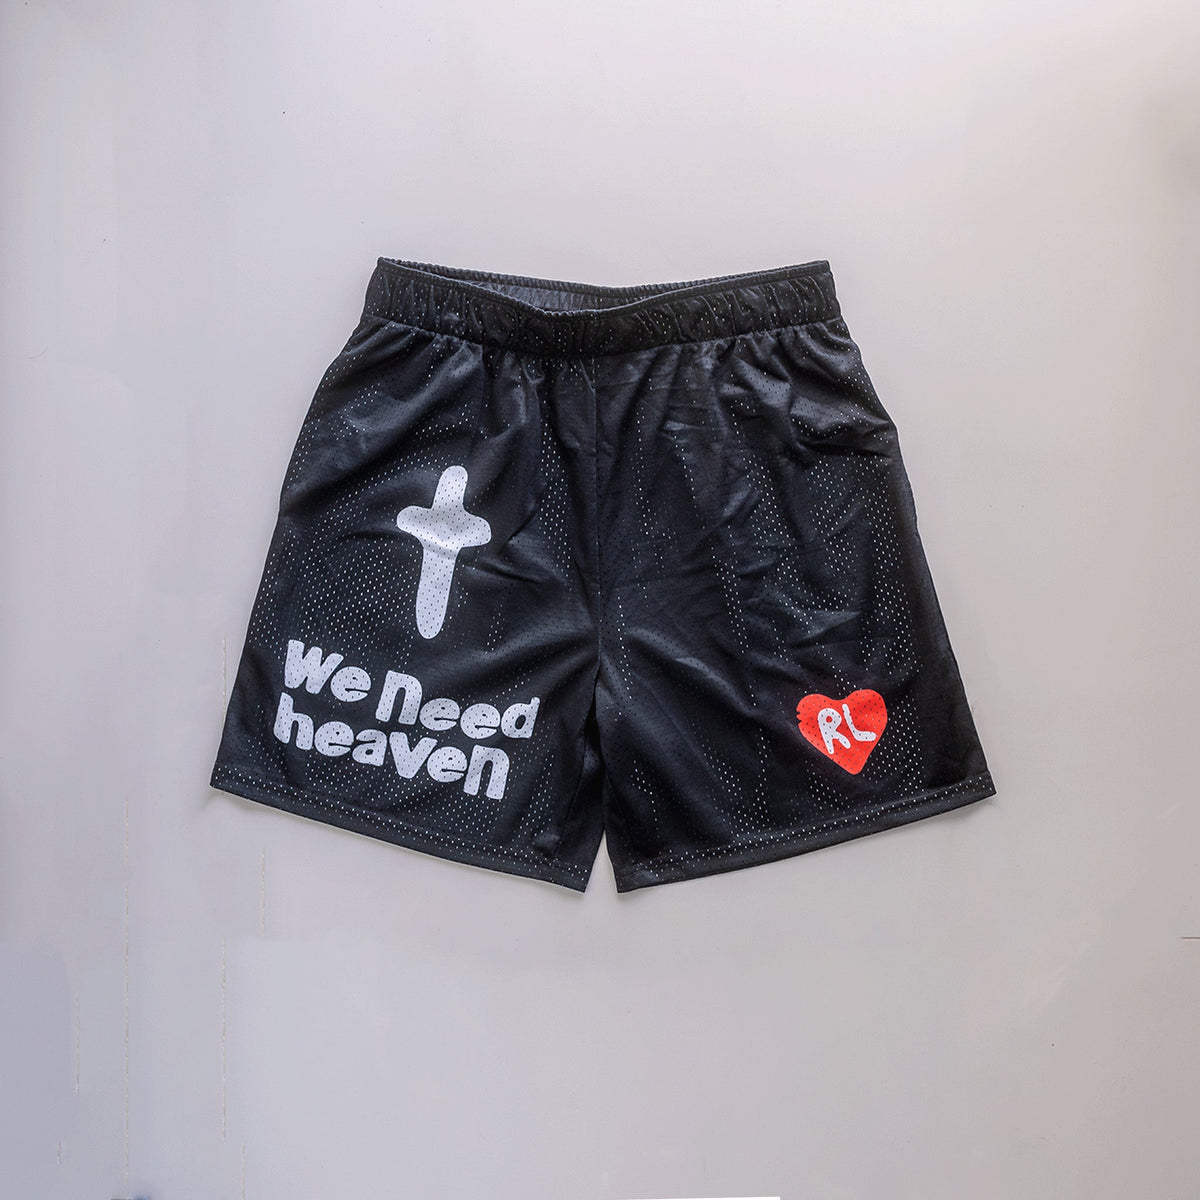 We Need Heaven Mesh Shorts - RED LETTERS